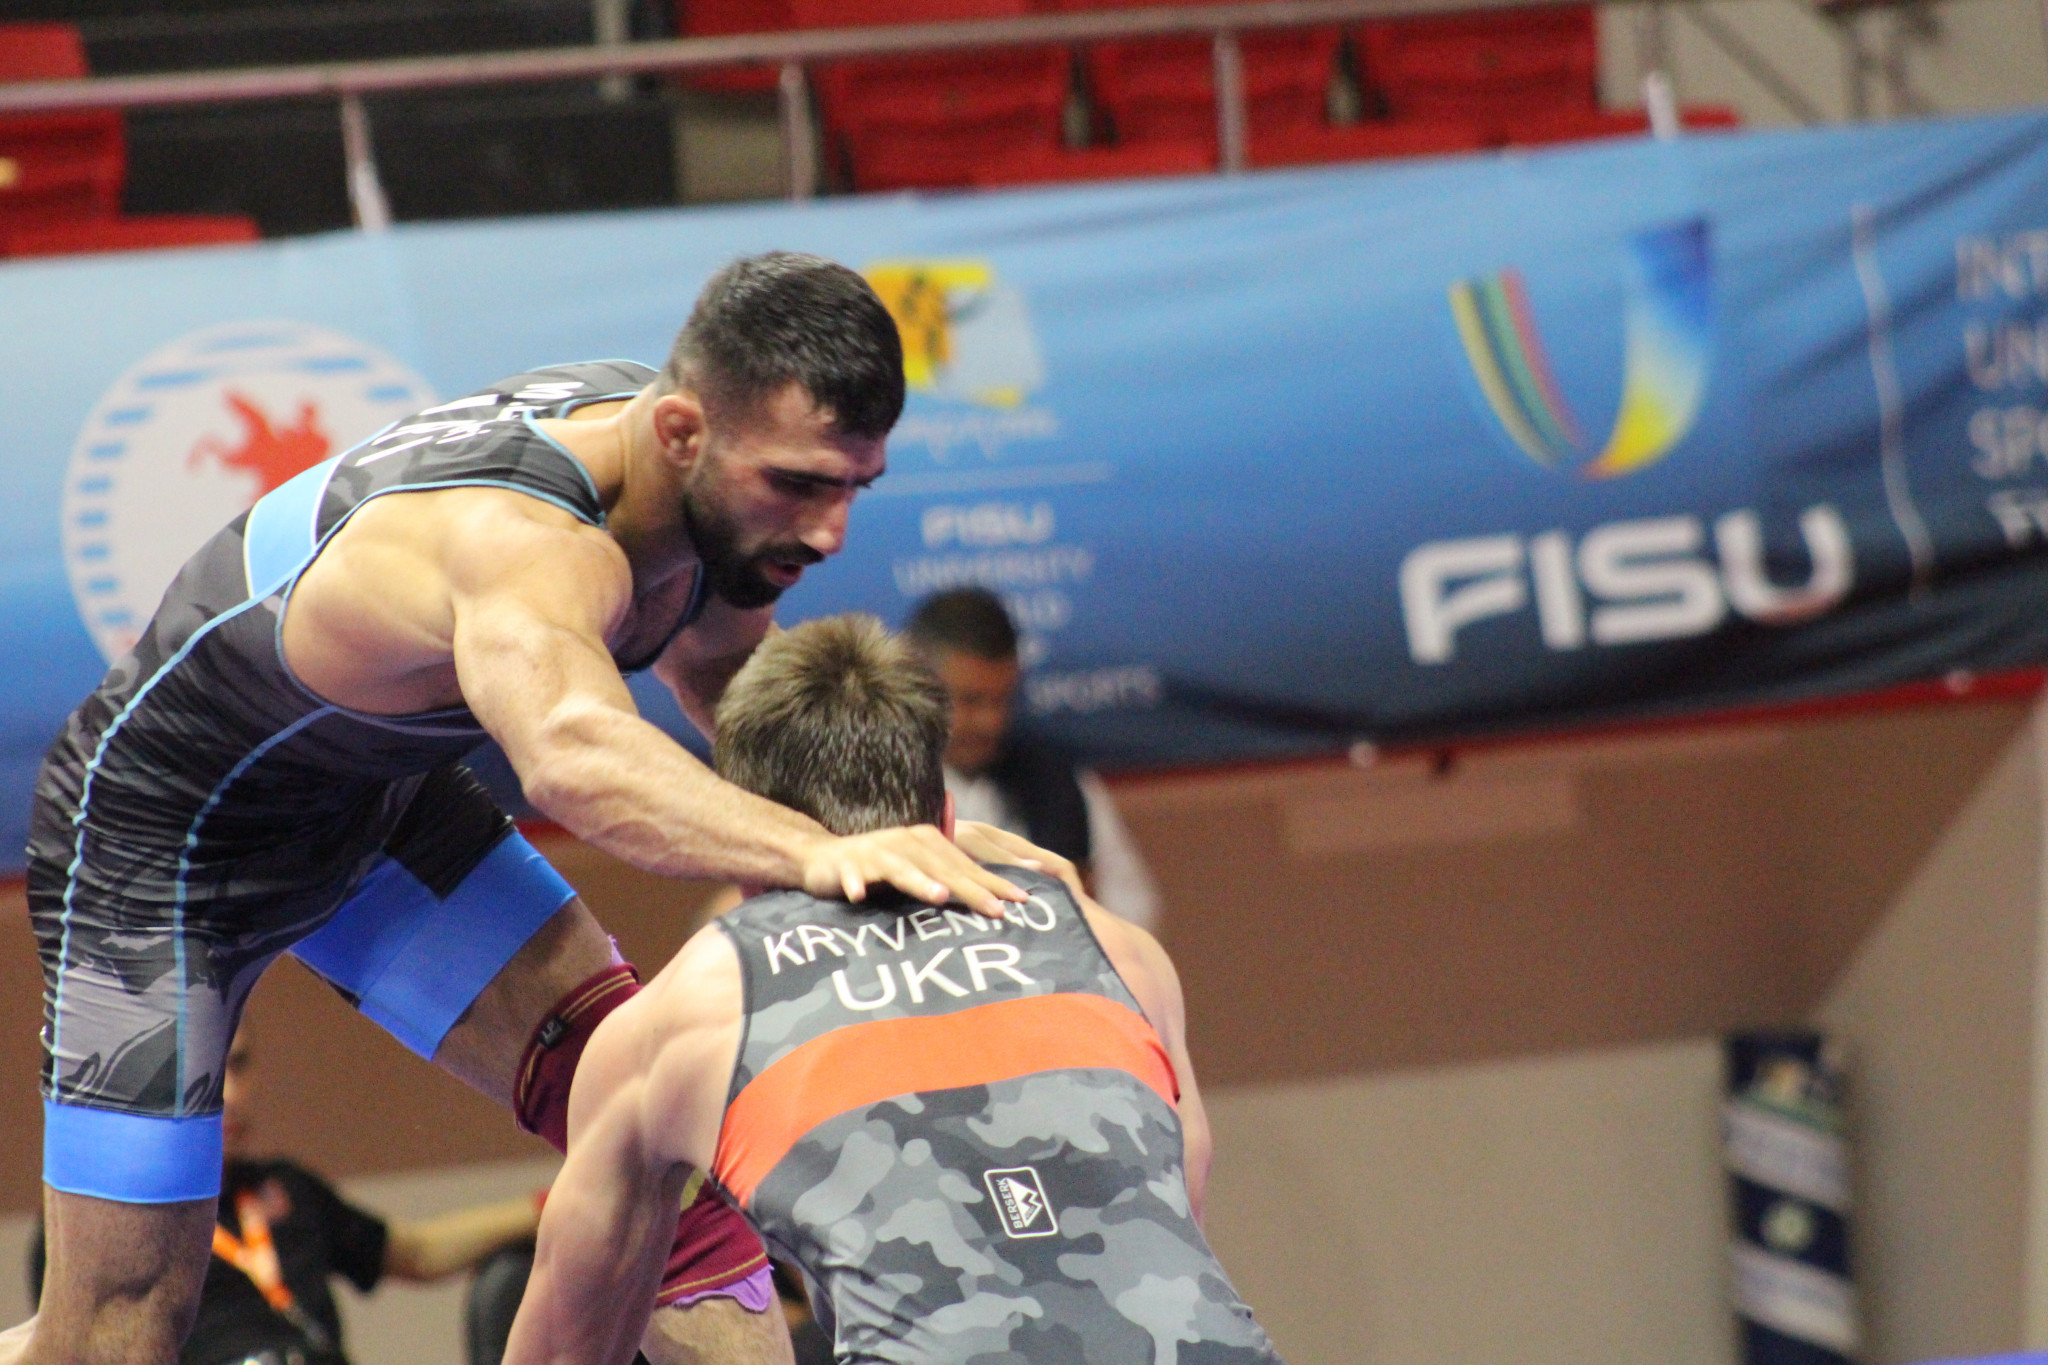 Iran dominated in wrestling today, winning four out of five gold medals ©FISU